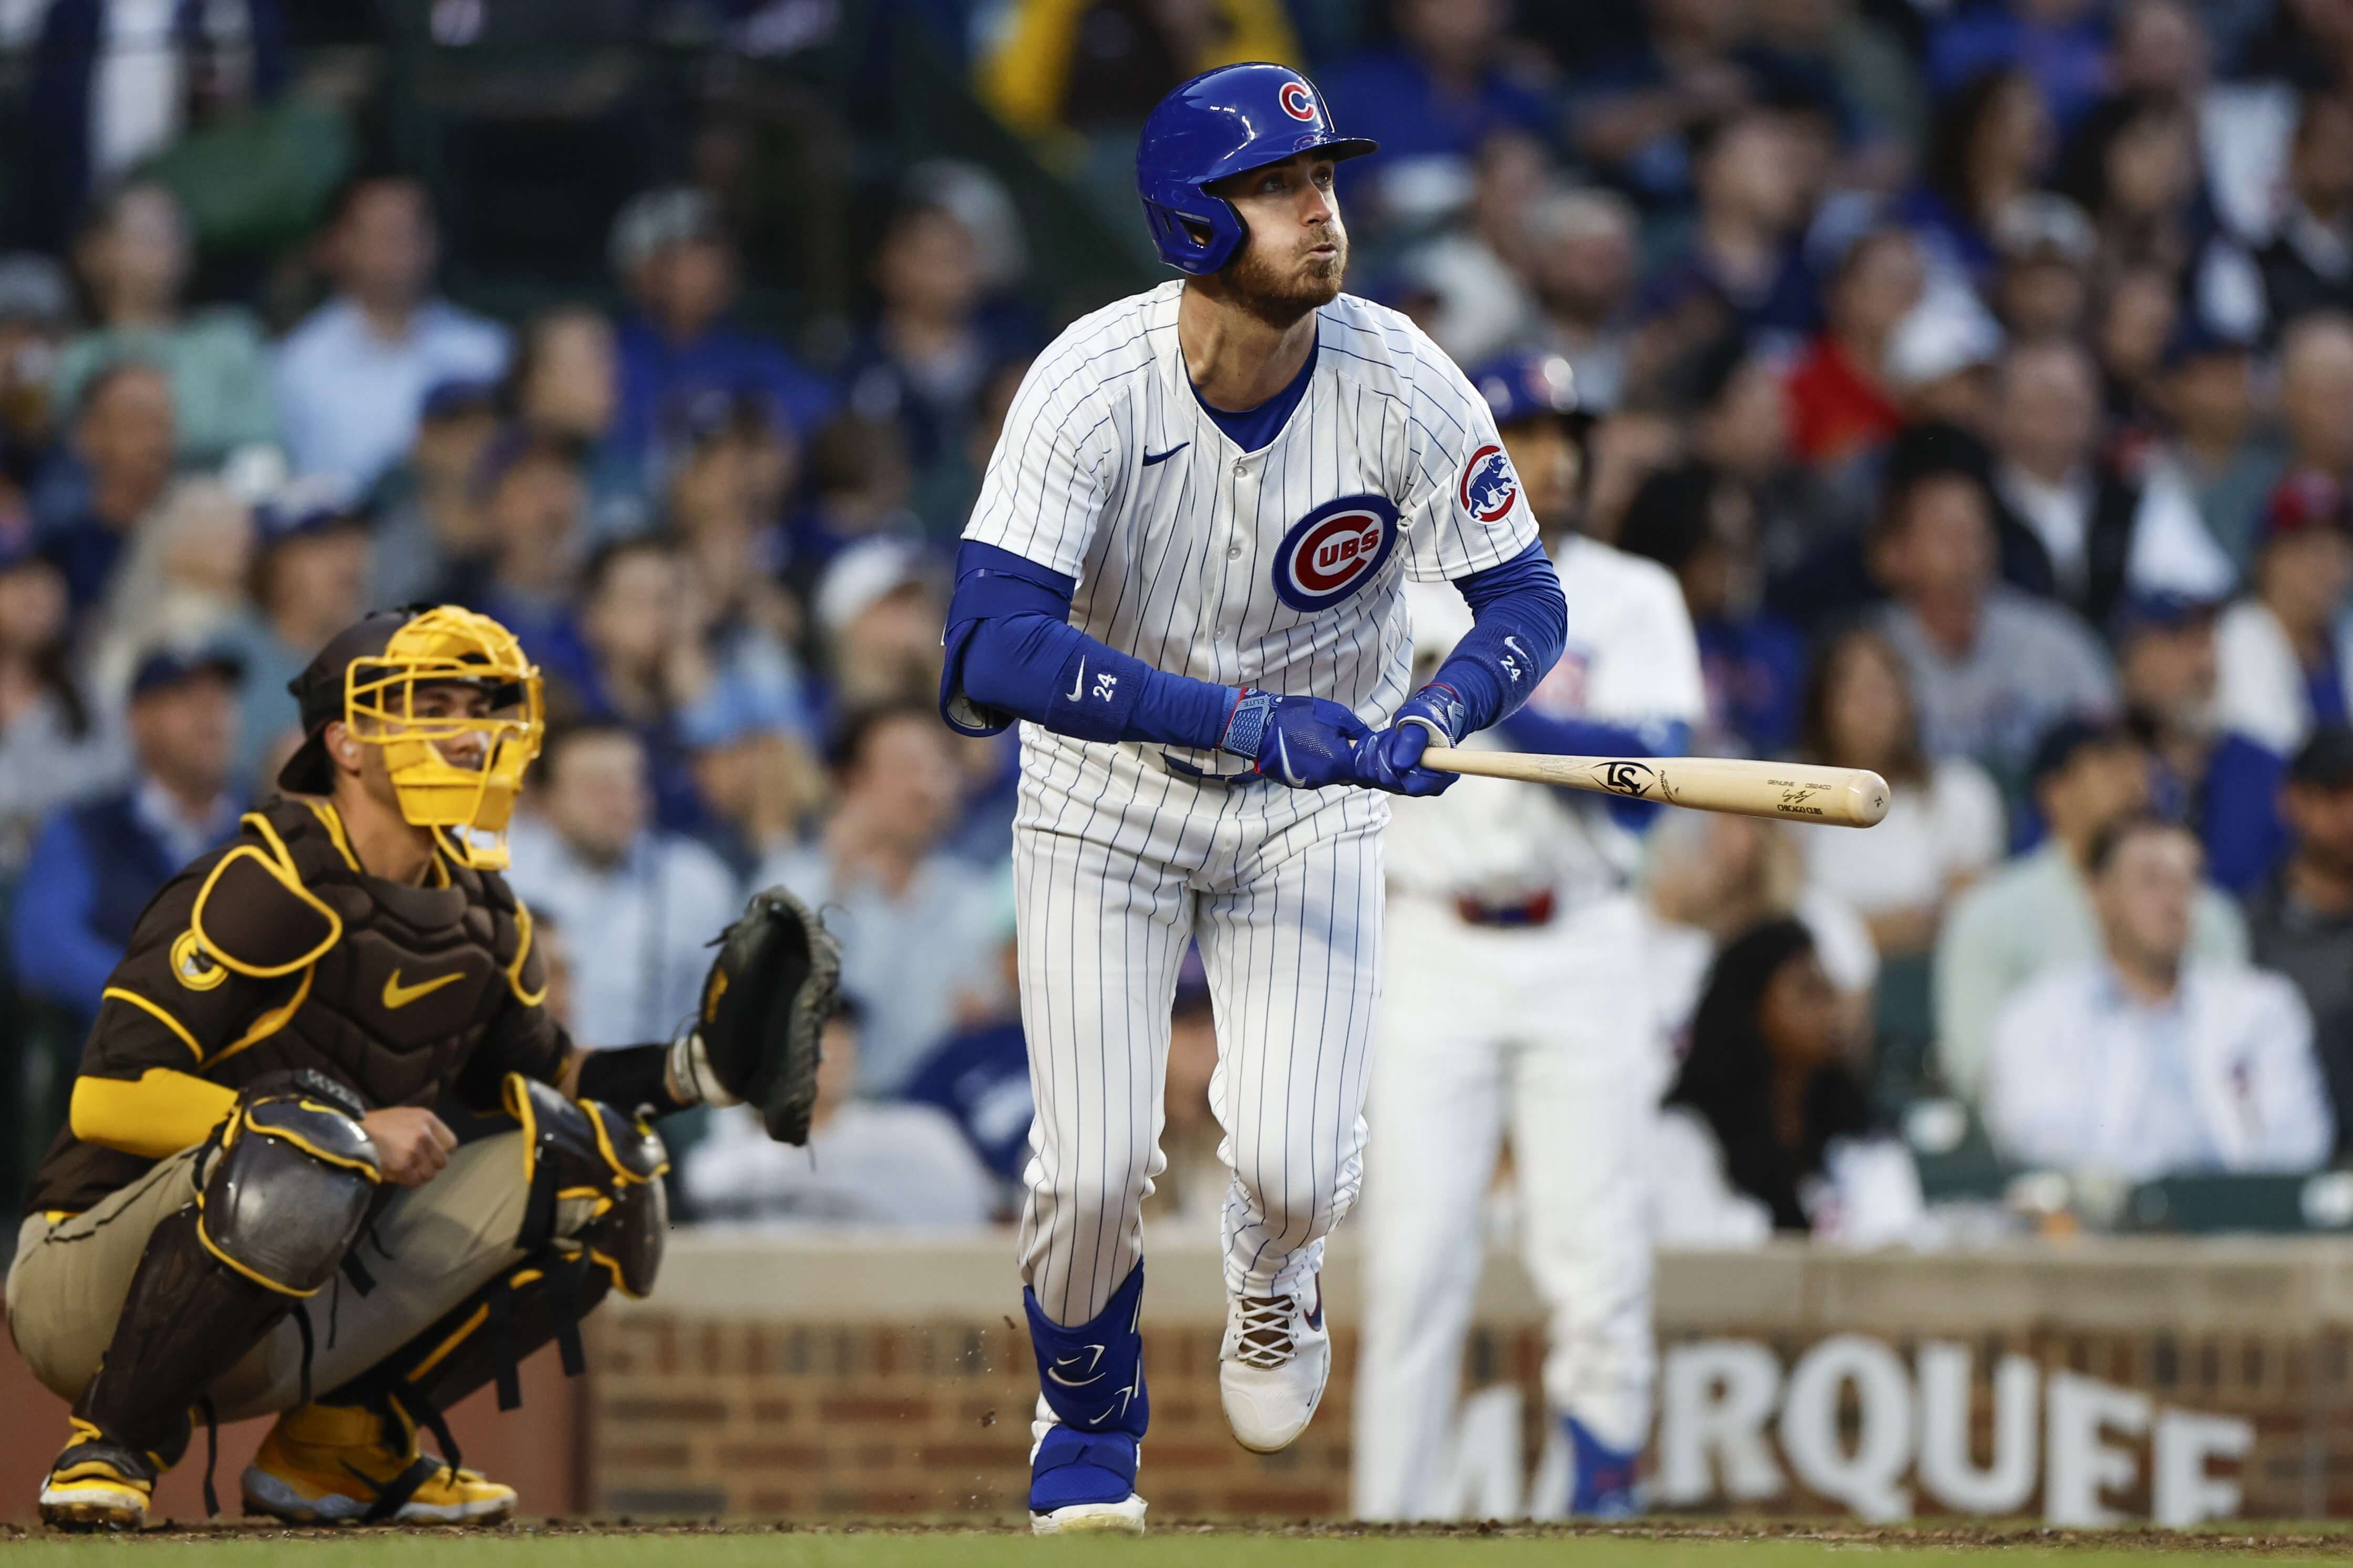 How To Bet - Reds vs Cubs Prediction, Picks, and Odds for Today's MLB Game